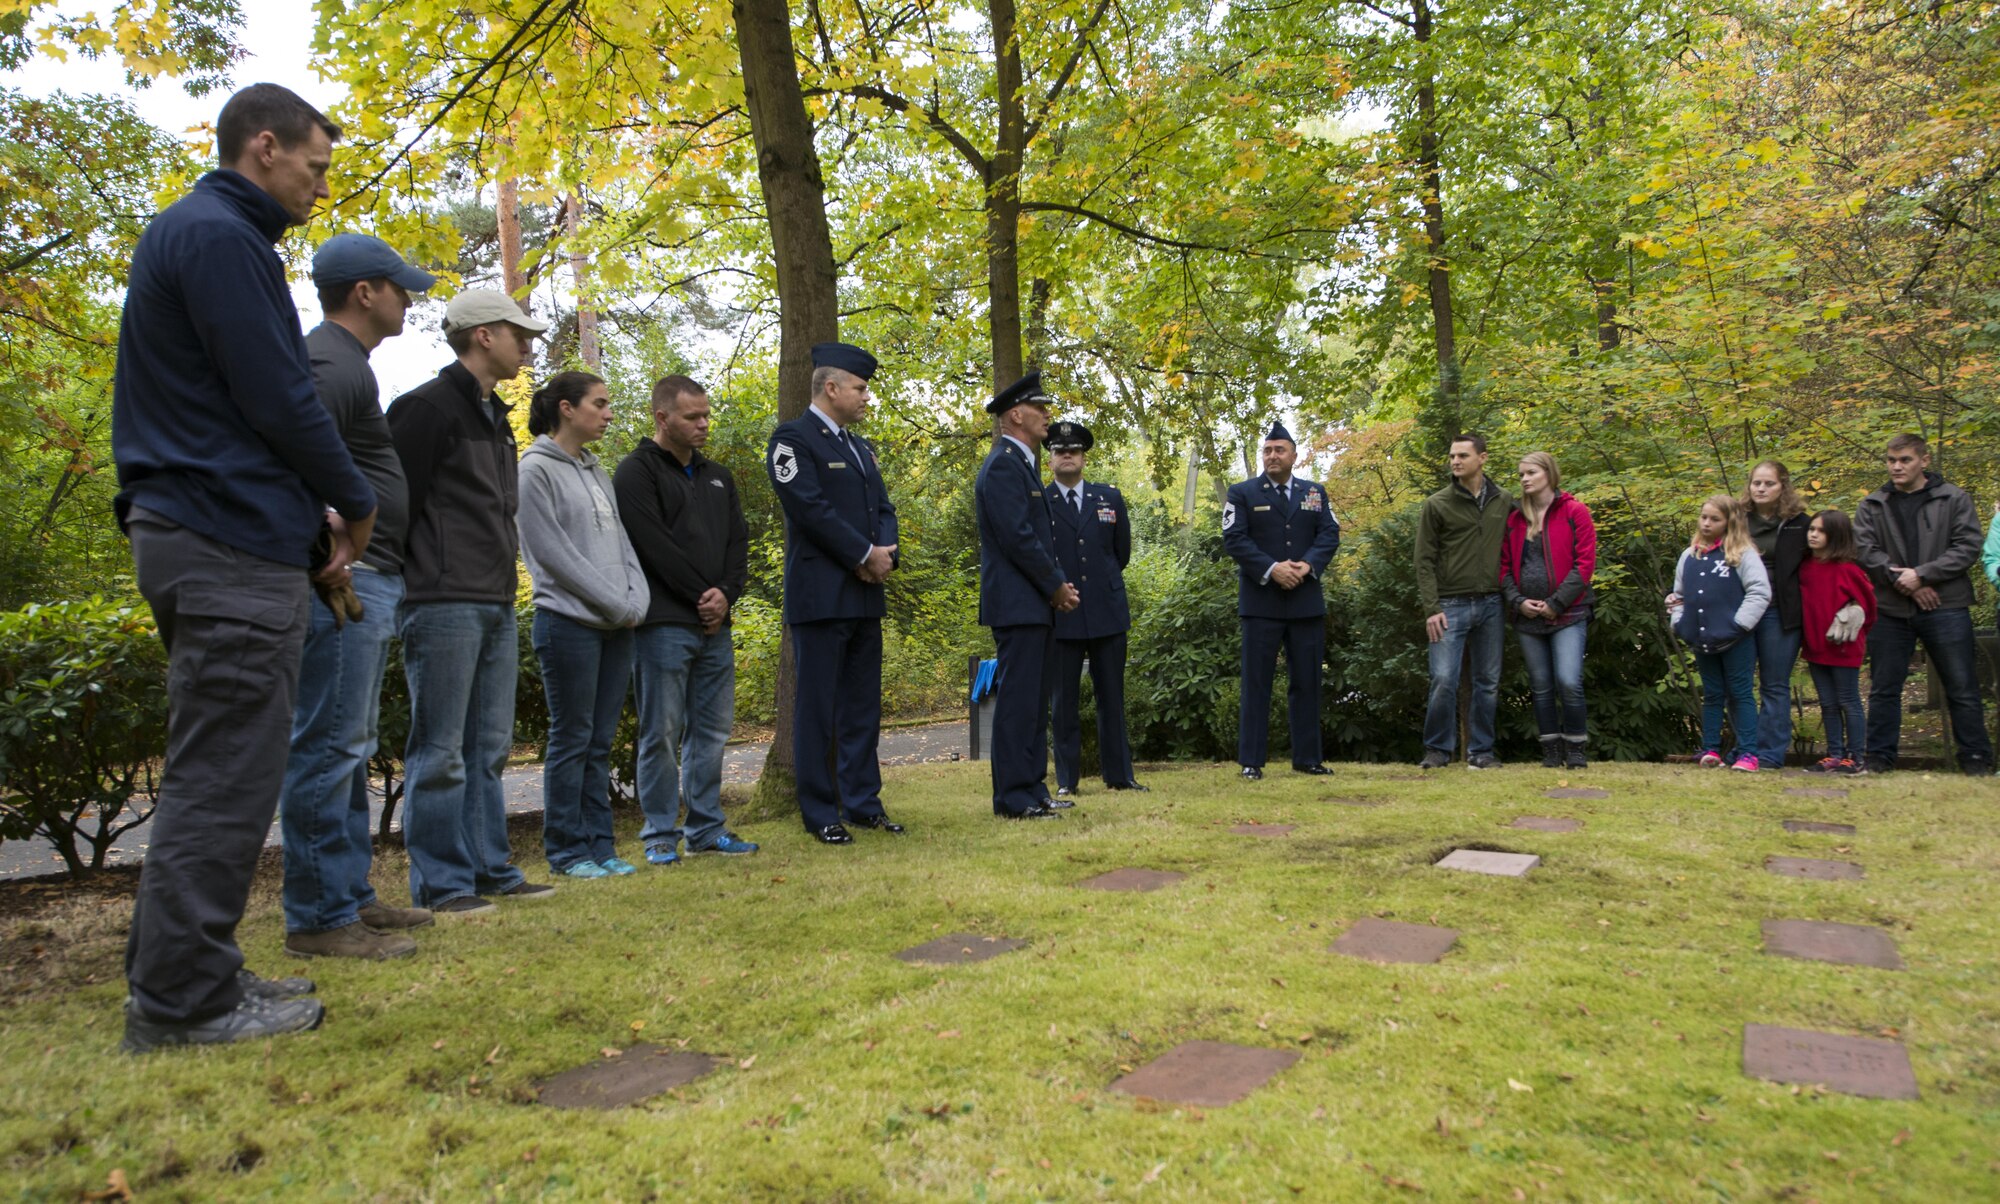 An engraved stone stands in the American Kindergraves in Kaiserslautern, Germany, Oct. 15, 2016. The stone reads, “Although gone from us they are not forgotten.” The Ramstein Area Chiefs’ Group held a dedication ceremony for Gary Currie, an infant who lost his life in 1952. Joy Caffey, Gary’s mother, does not know where her son is laid to rest. Her family reached out to the Ramstein Area Chief’s Group and they offered to dedicate a gravestone to Gary within the Kindergraves. (U.S. Air Force photo by Senior Airman Tryphena Mayhugh)